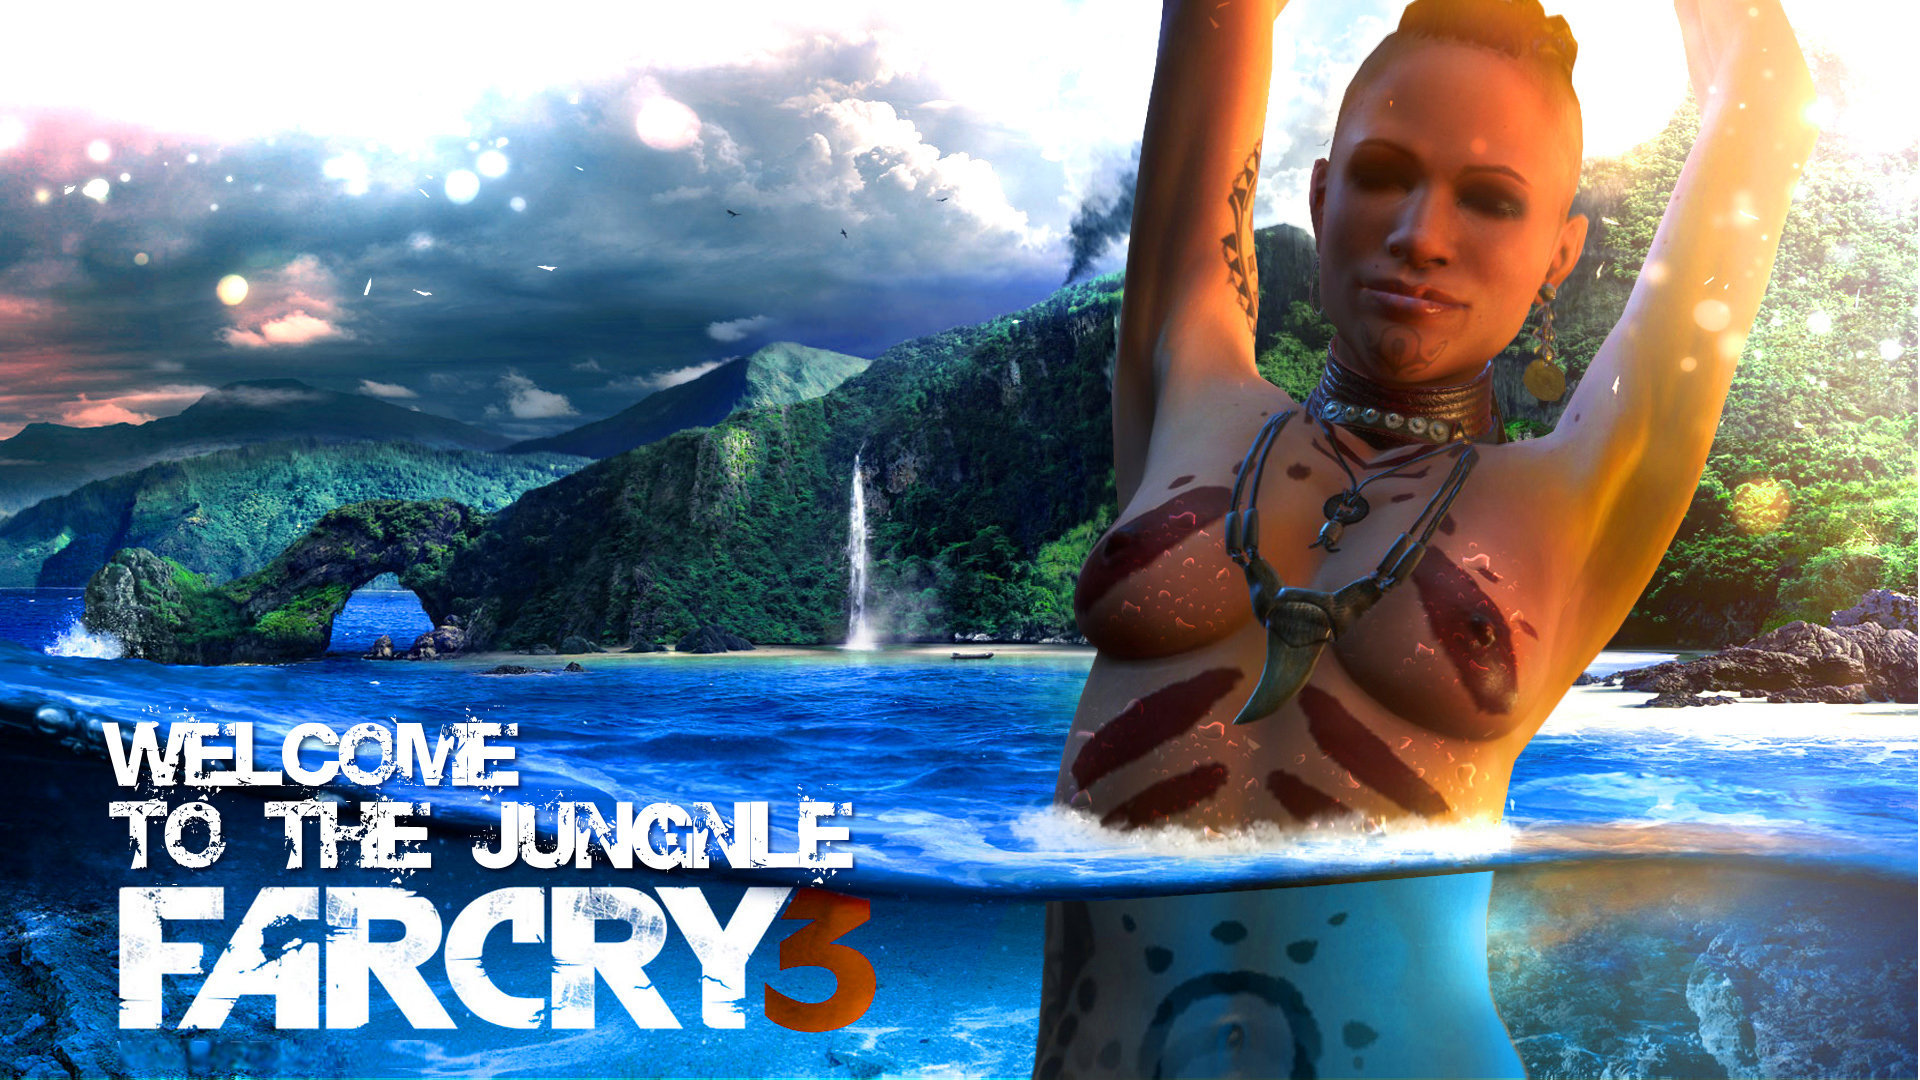 Far Cry 3 Wallpapers 19201080 23192 HD Wallpaper Res 1920x1080 1920x1080